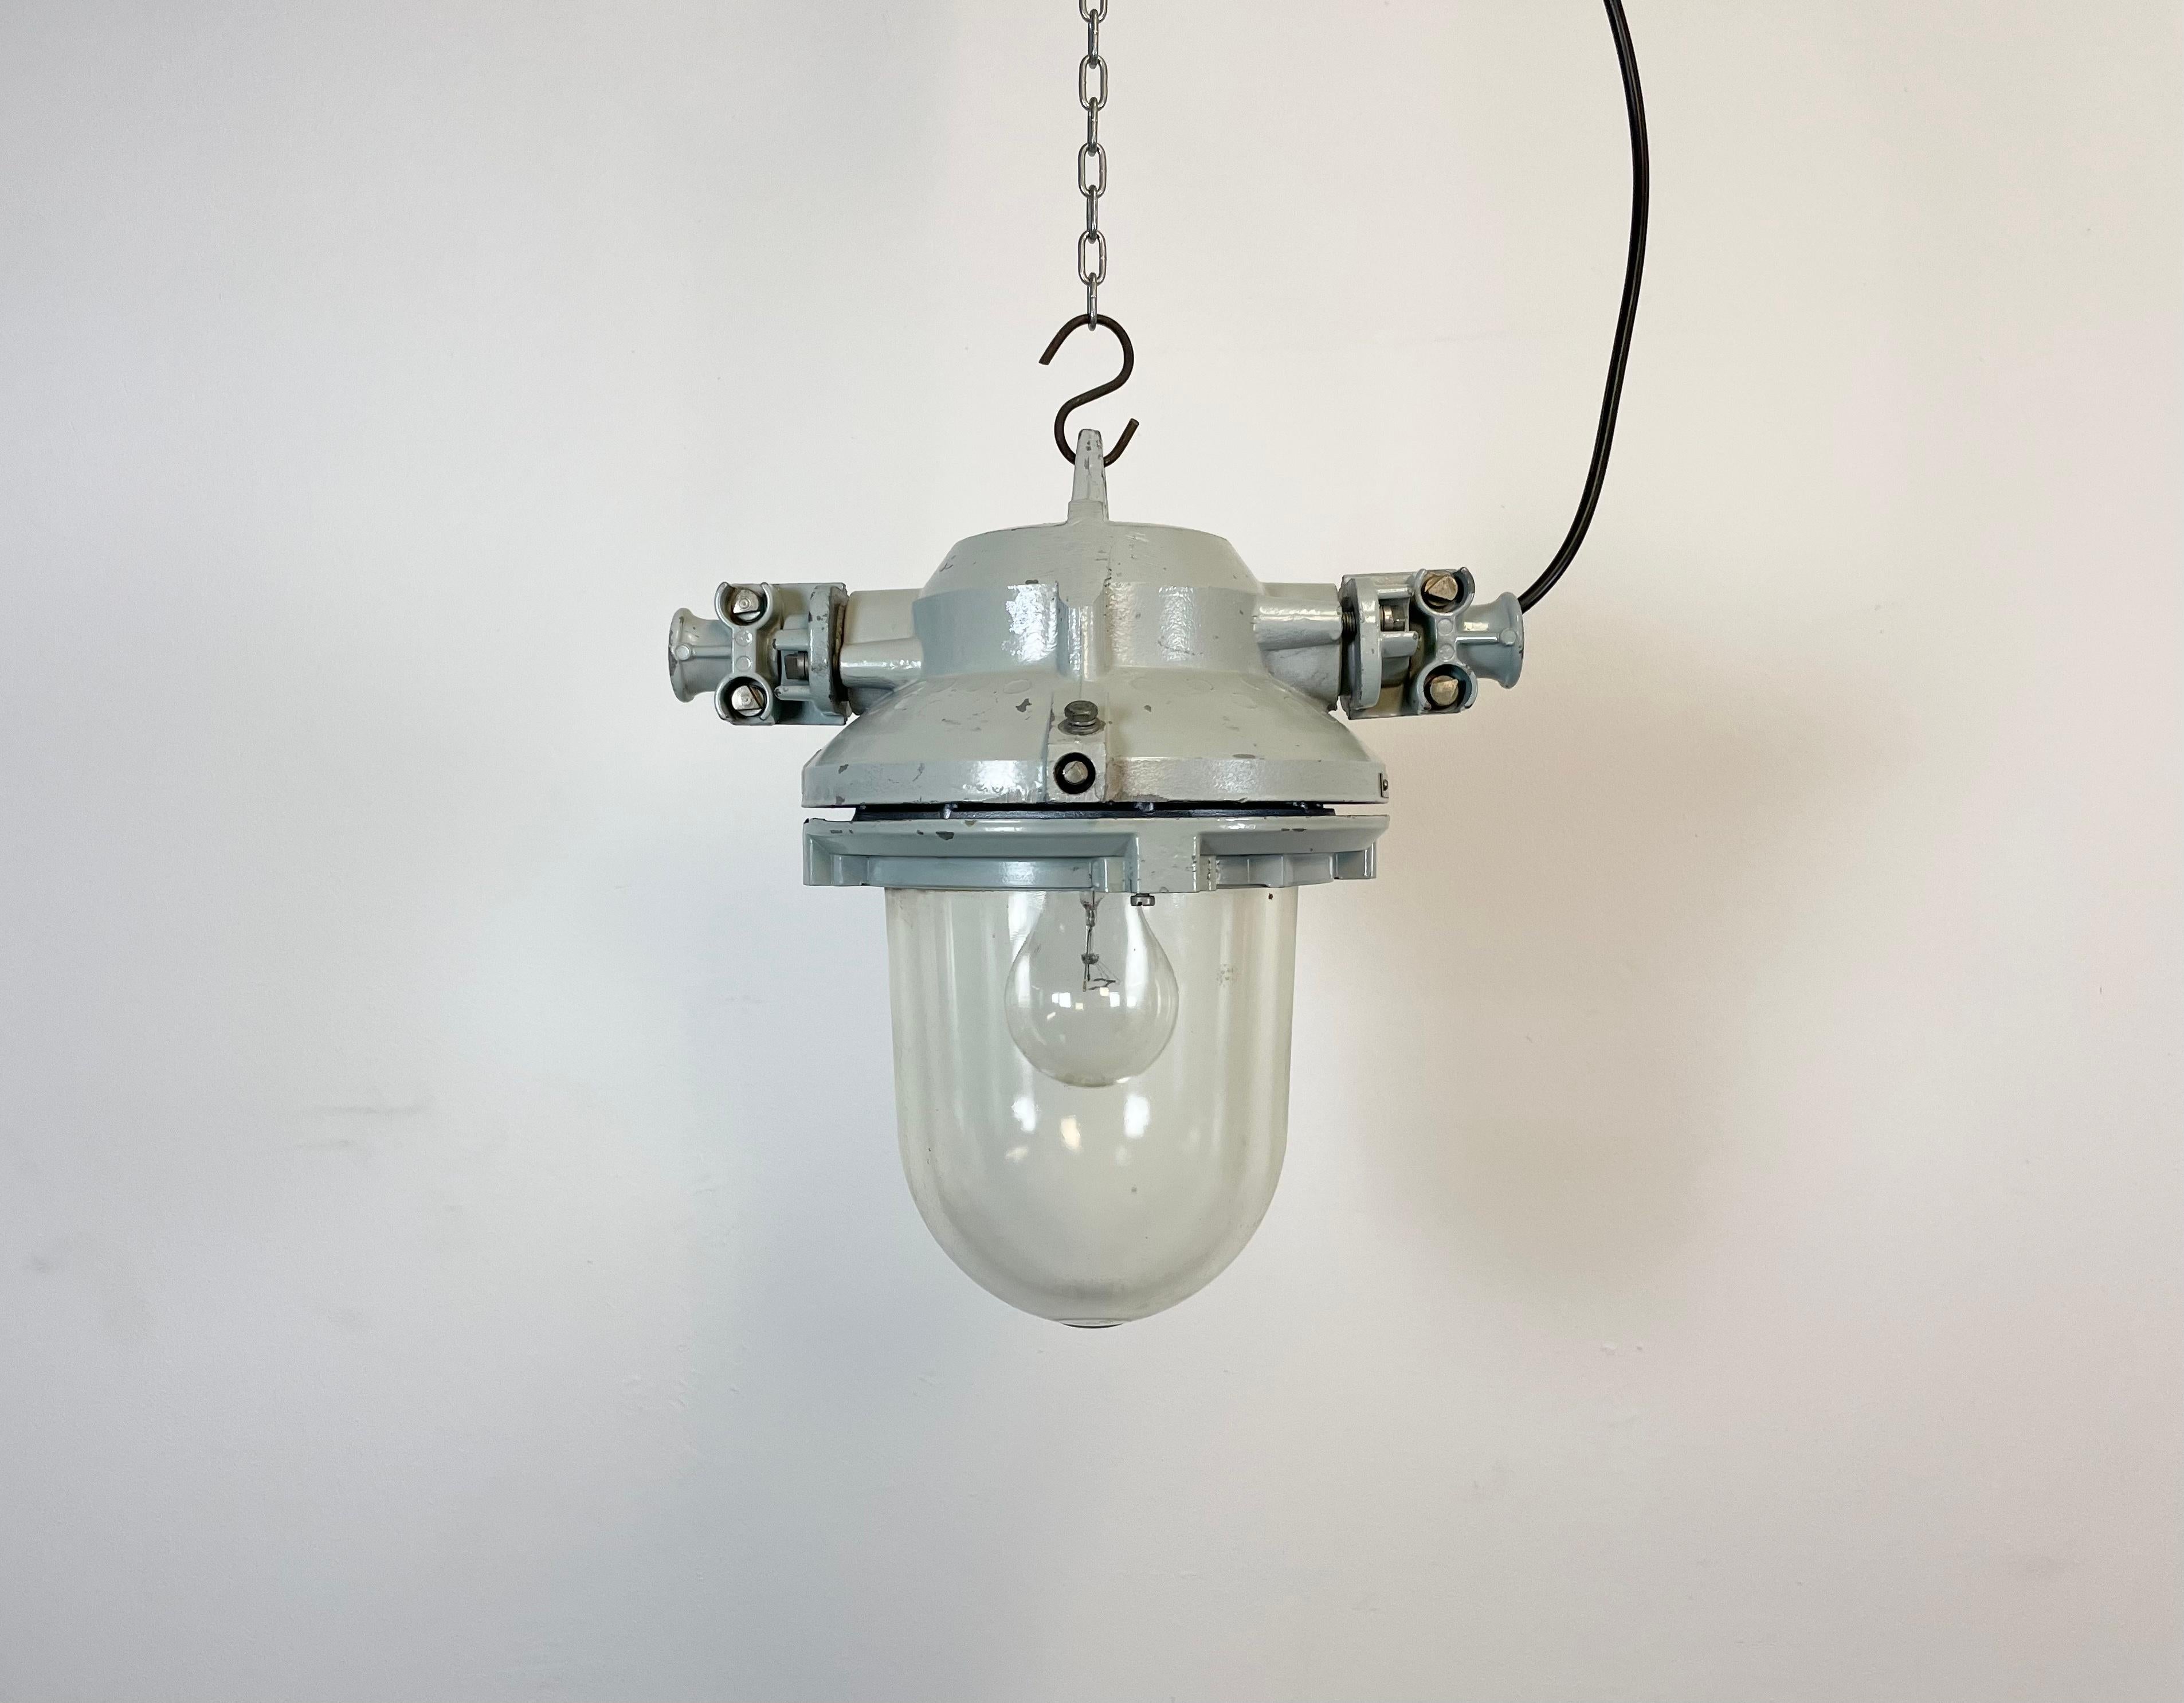 Grey industrial light with massive protective glass bulb. Made in former Czechoslovakia by Elektrosvit during the 1970s. It features cast aluminium body and clear glass. Porcelain socket requires E27 lightbulbs. Newly wired. Weight: 7 kg.